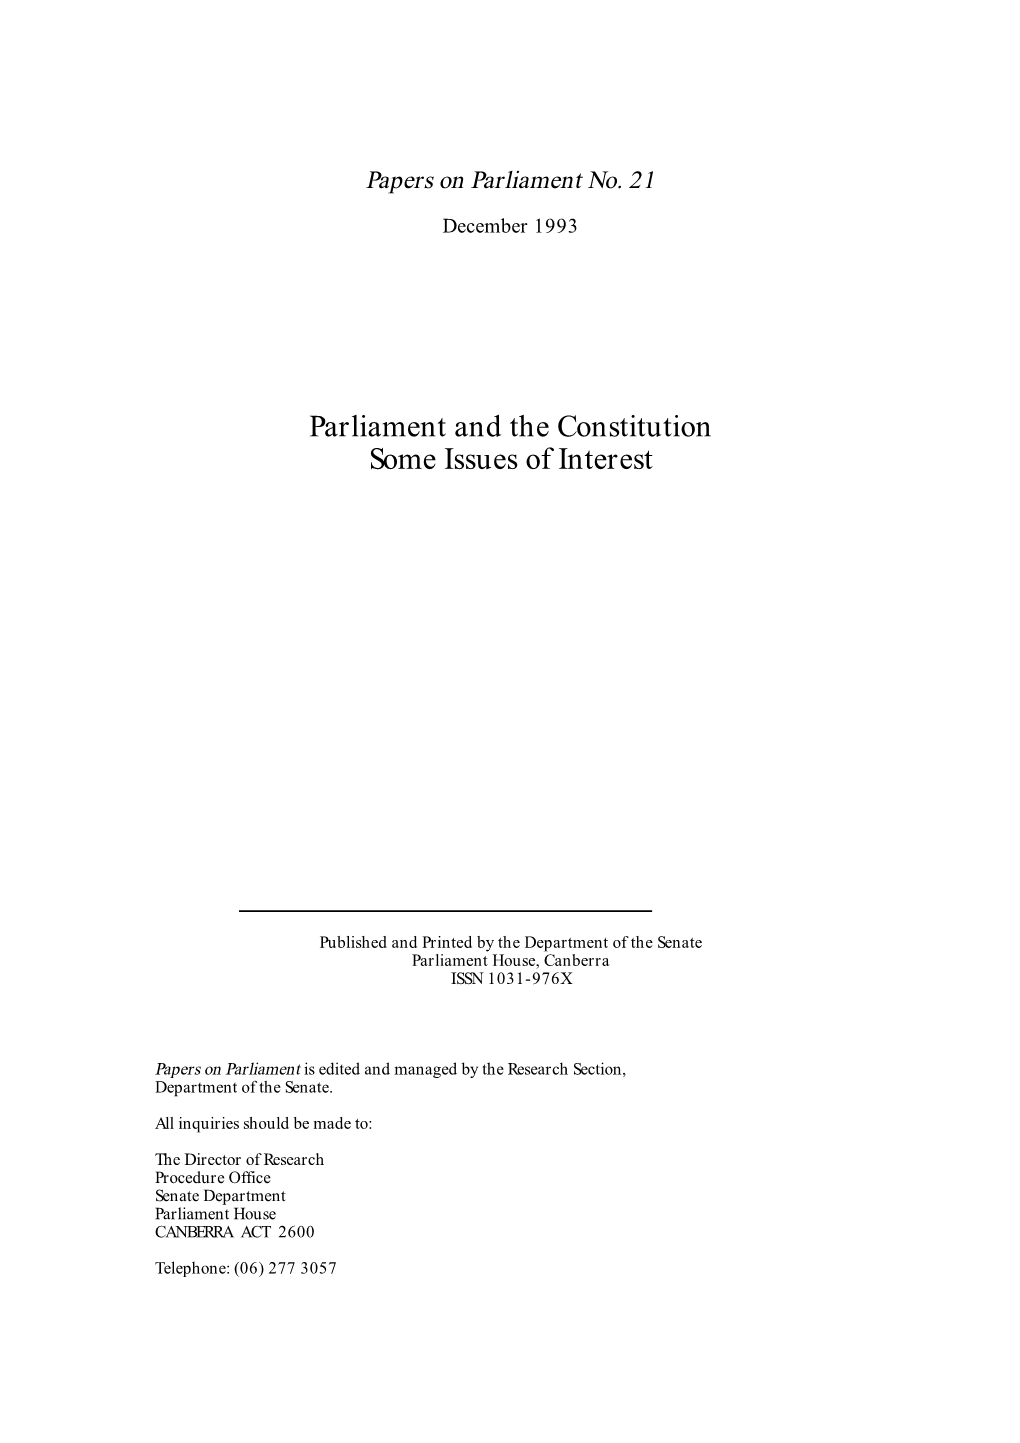 Parliament and the Constitution Some Issues of Interest